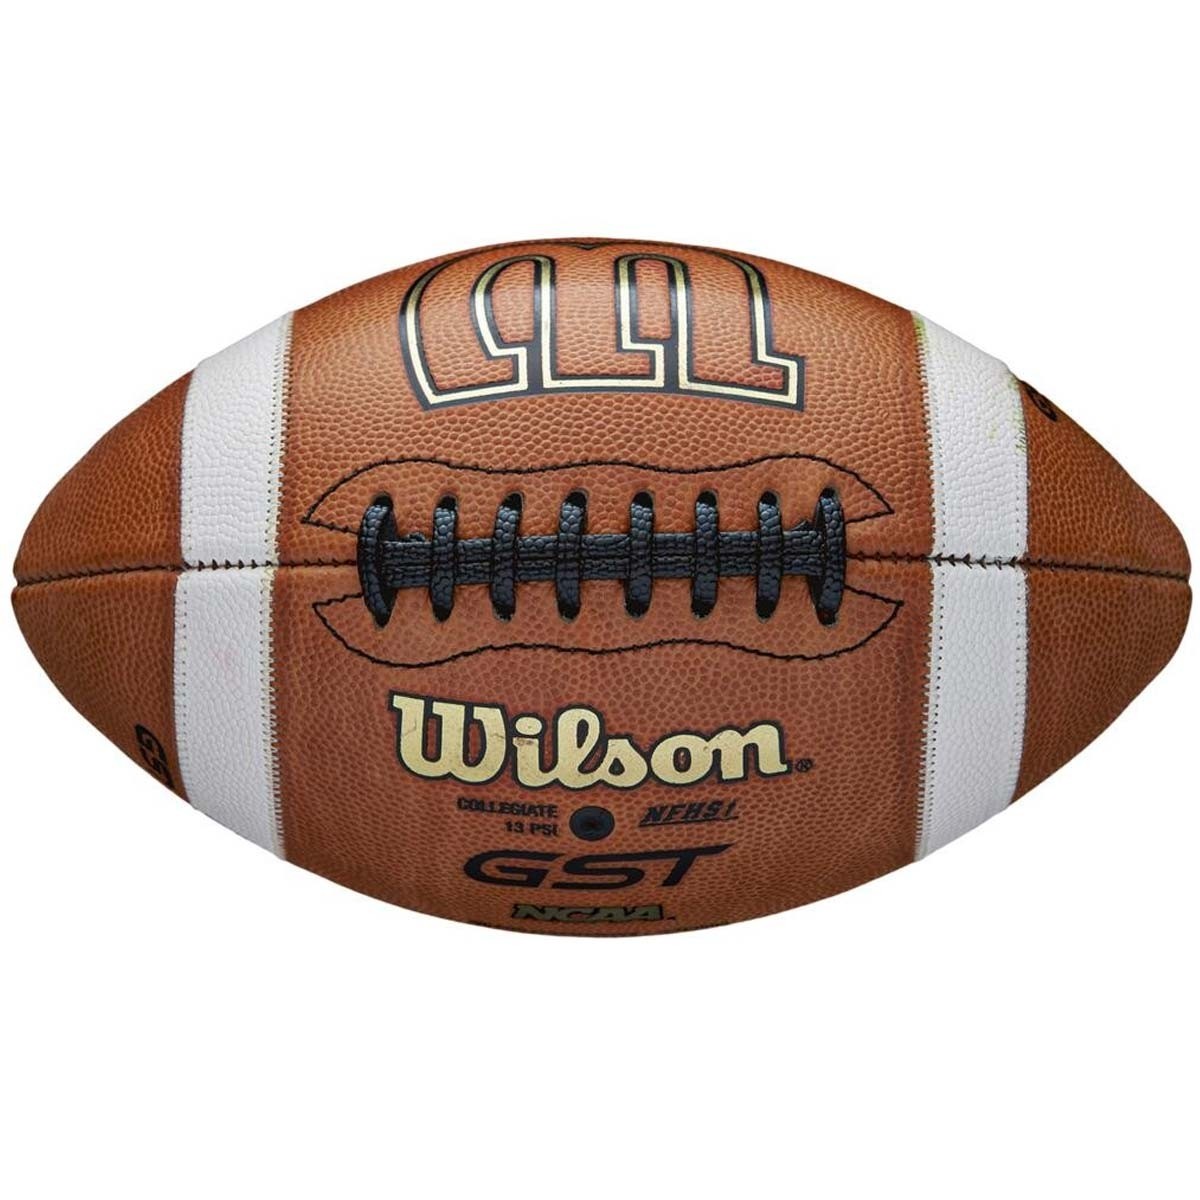 Finding Ideal Nfl Throwback Jersey wilson-1003-gst-nfhs-official-leather-game-football-2d2